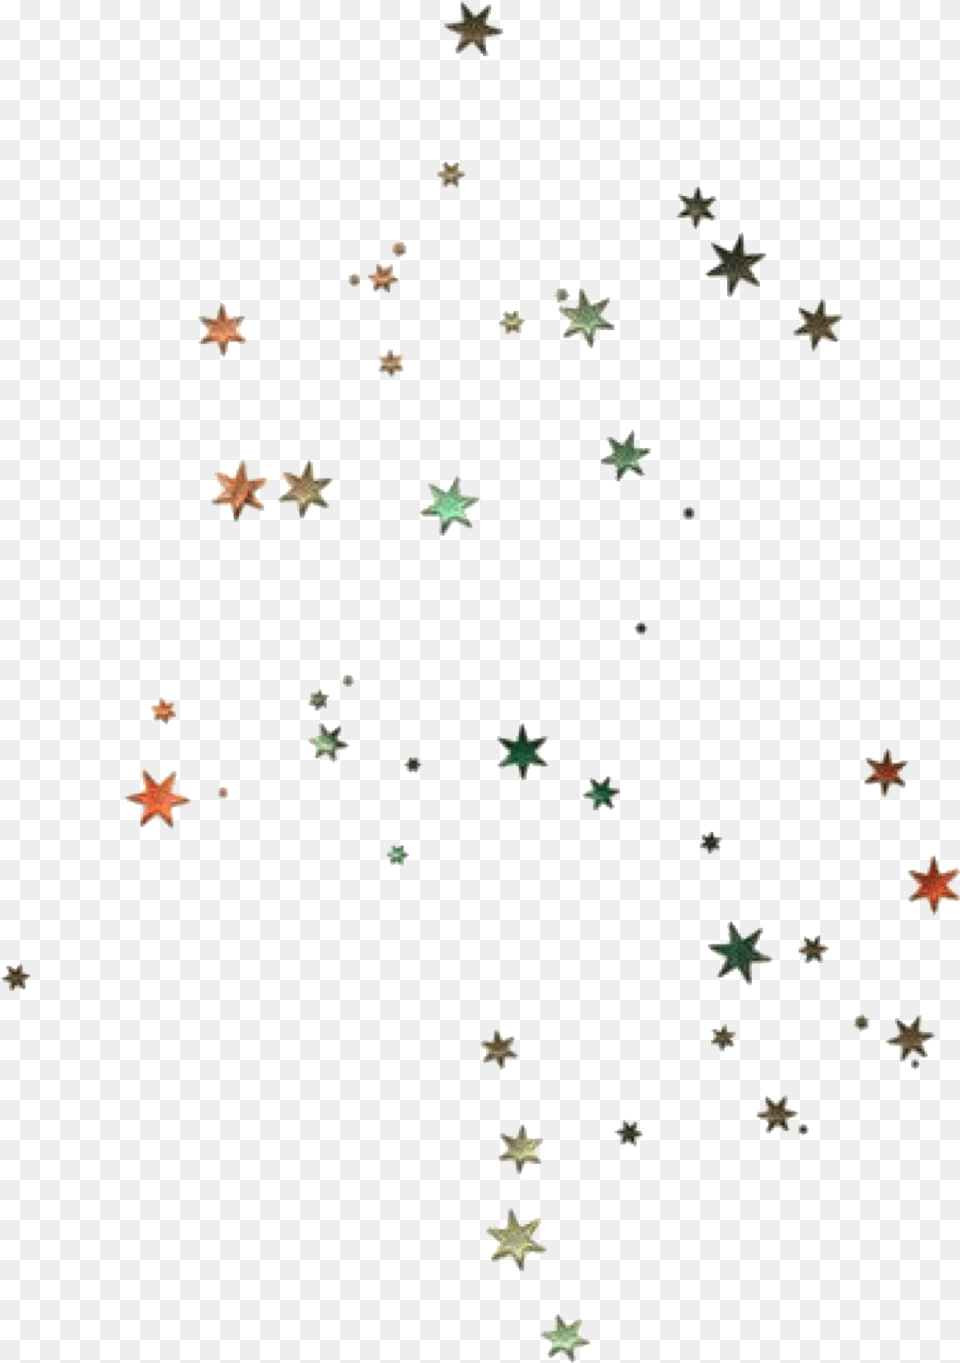 Sticker Stars Scatter Scattered Glitter Tumblr Aesthetic Star Doodle Background, Outdoors, Nature, Symbol Png